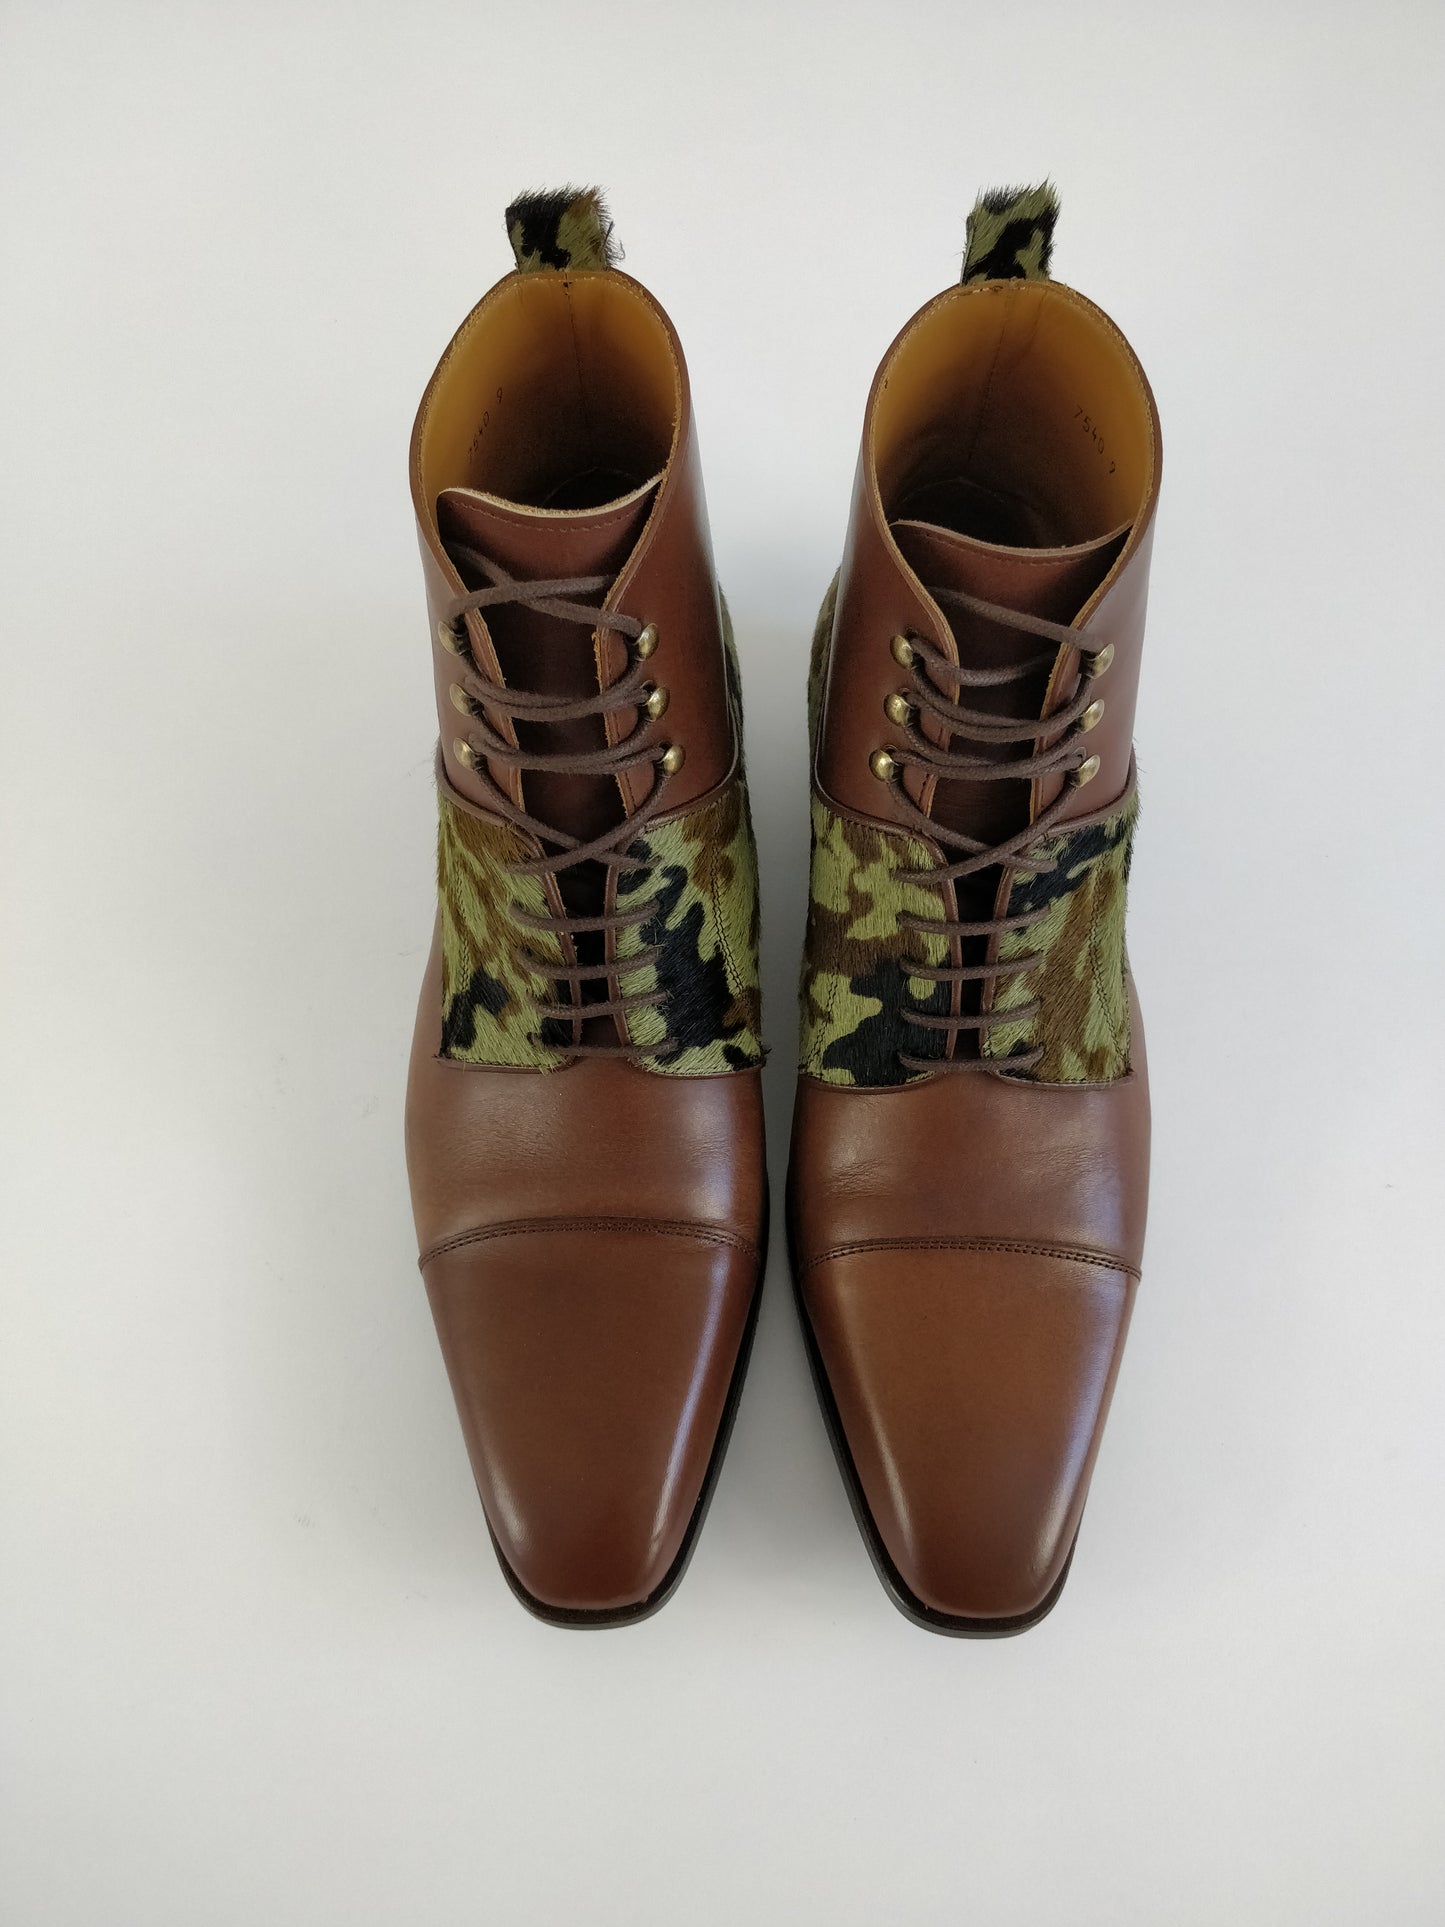 MEN HANDMADE Classic BOOTS Genuine Leather,Men's Dress Boots,Ankle Boots,Brown Boots,Camouflage Boots,Crafted in Spain,Design in Uk